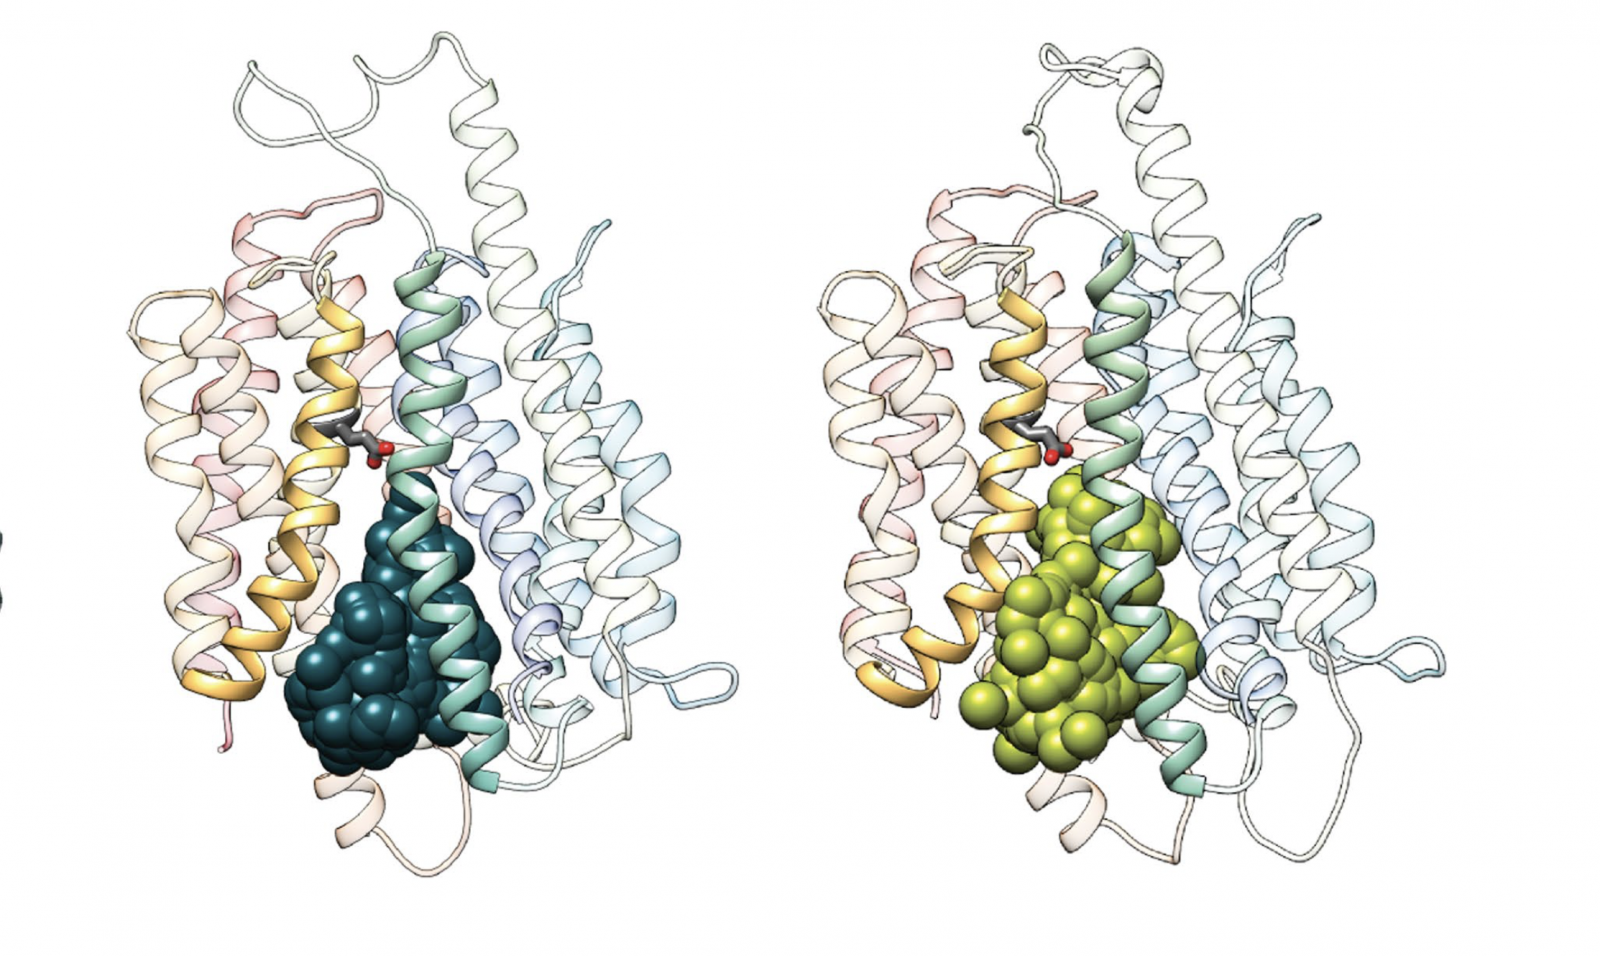 molecular models of the MFSD2A protein in process of transporting omega-3 into the brain